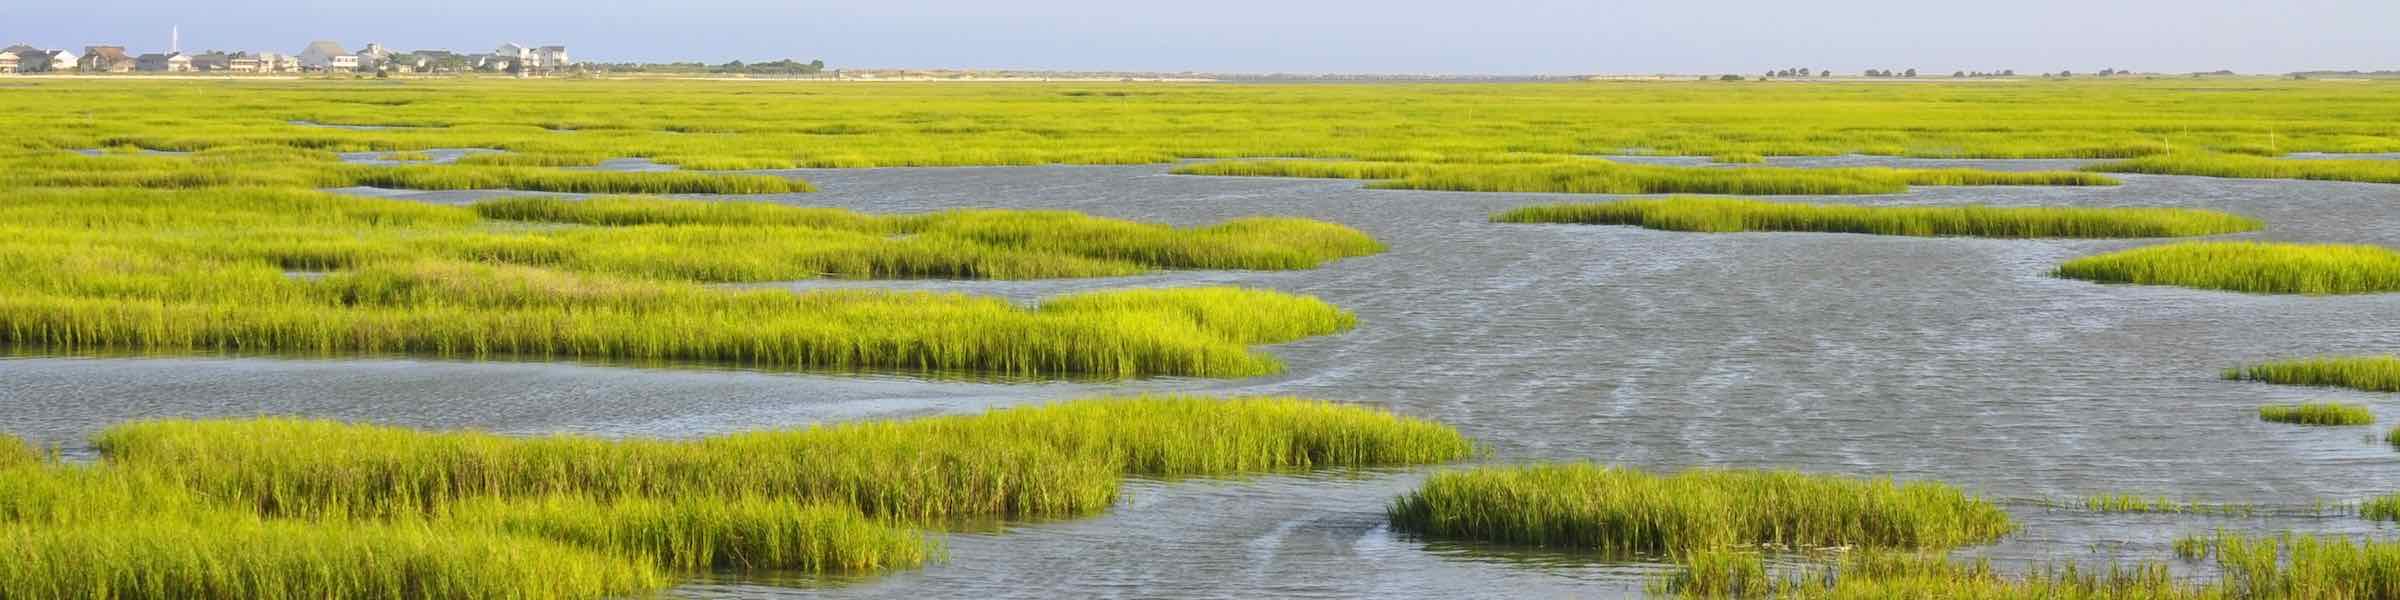 The salt marshes at Murrells Inlet, SC.